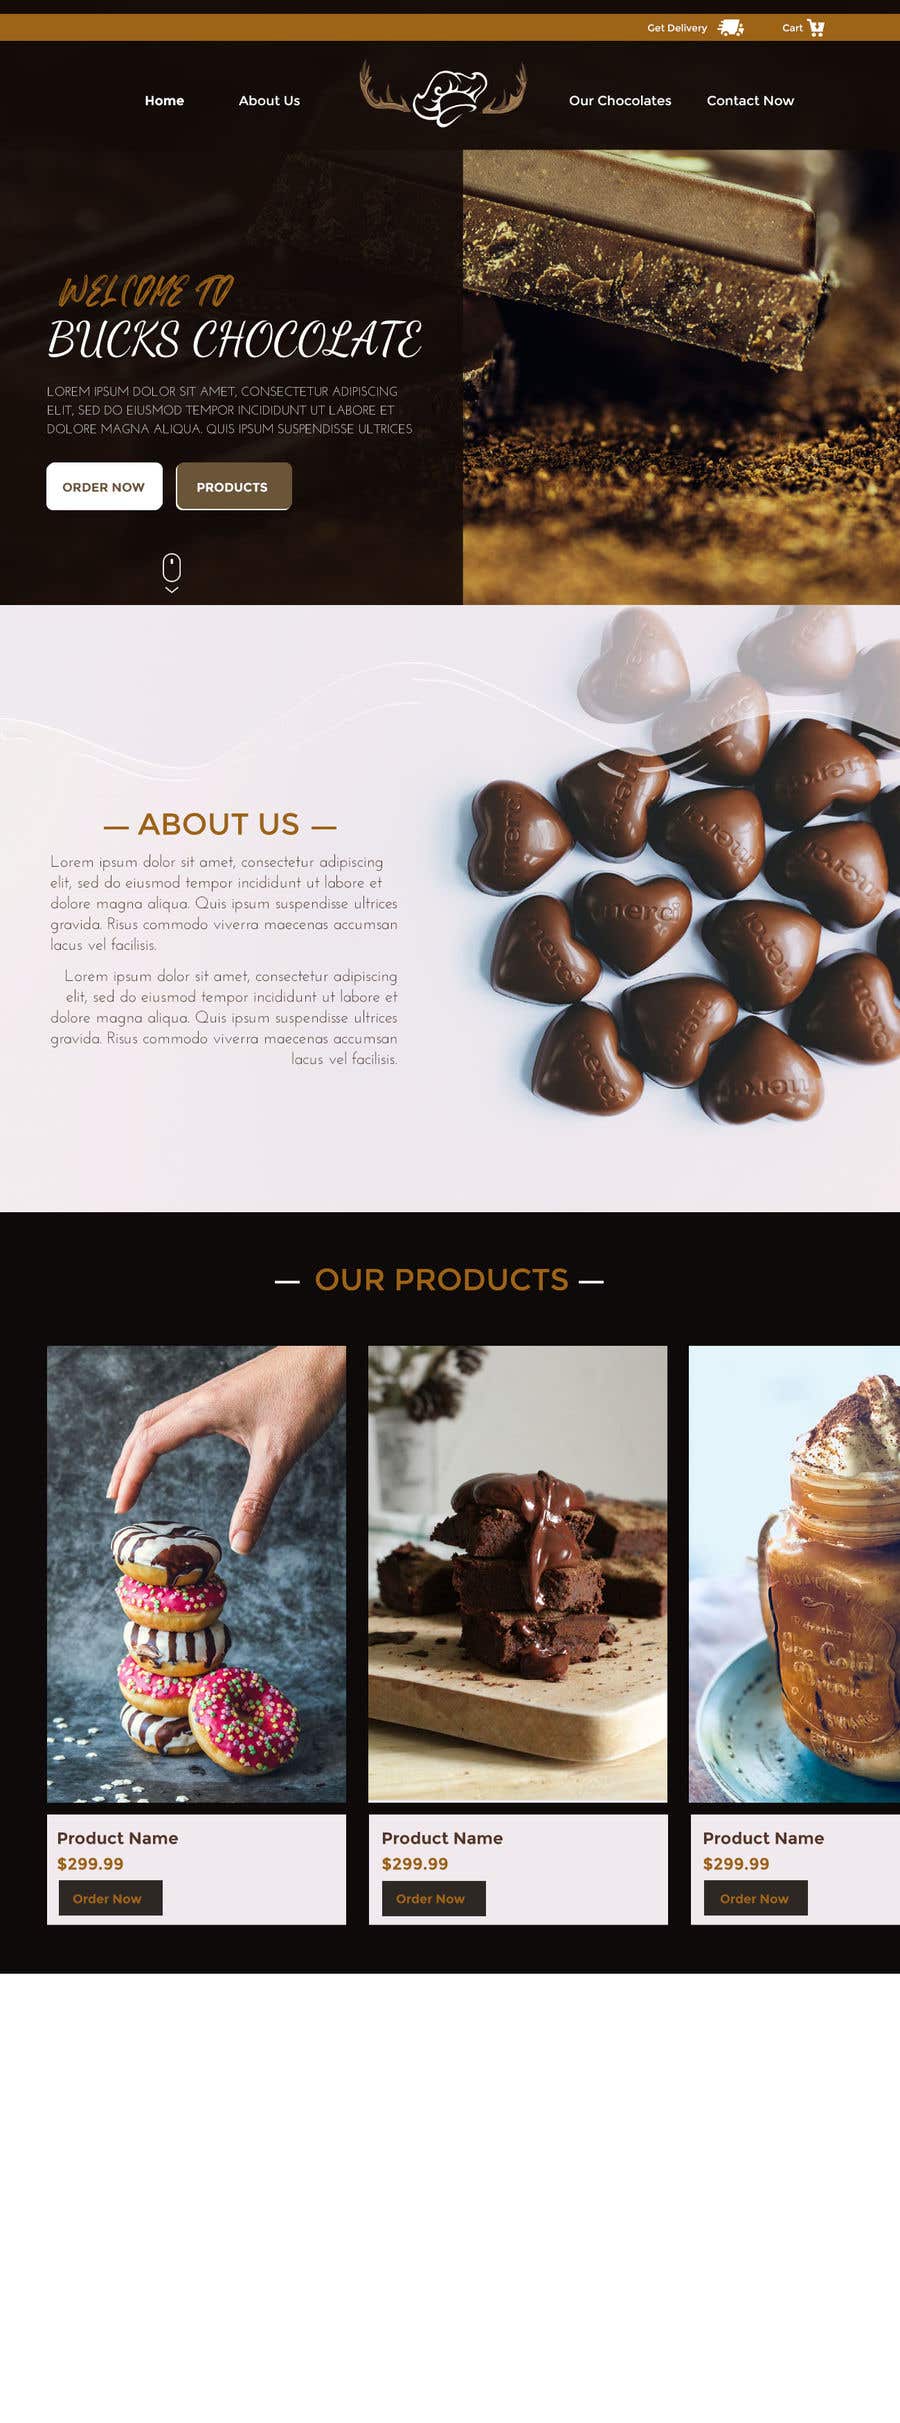 a website with pictures of chocolates and desserts